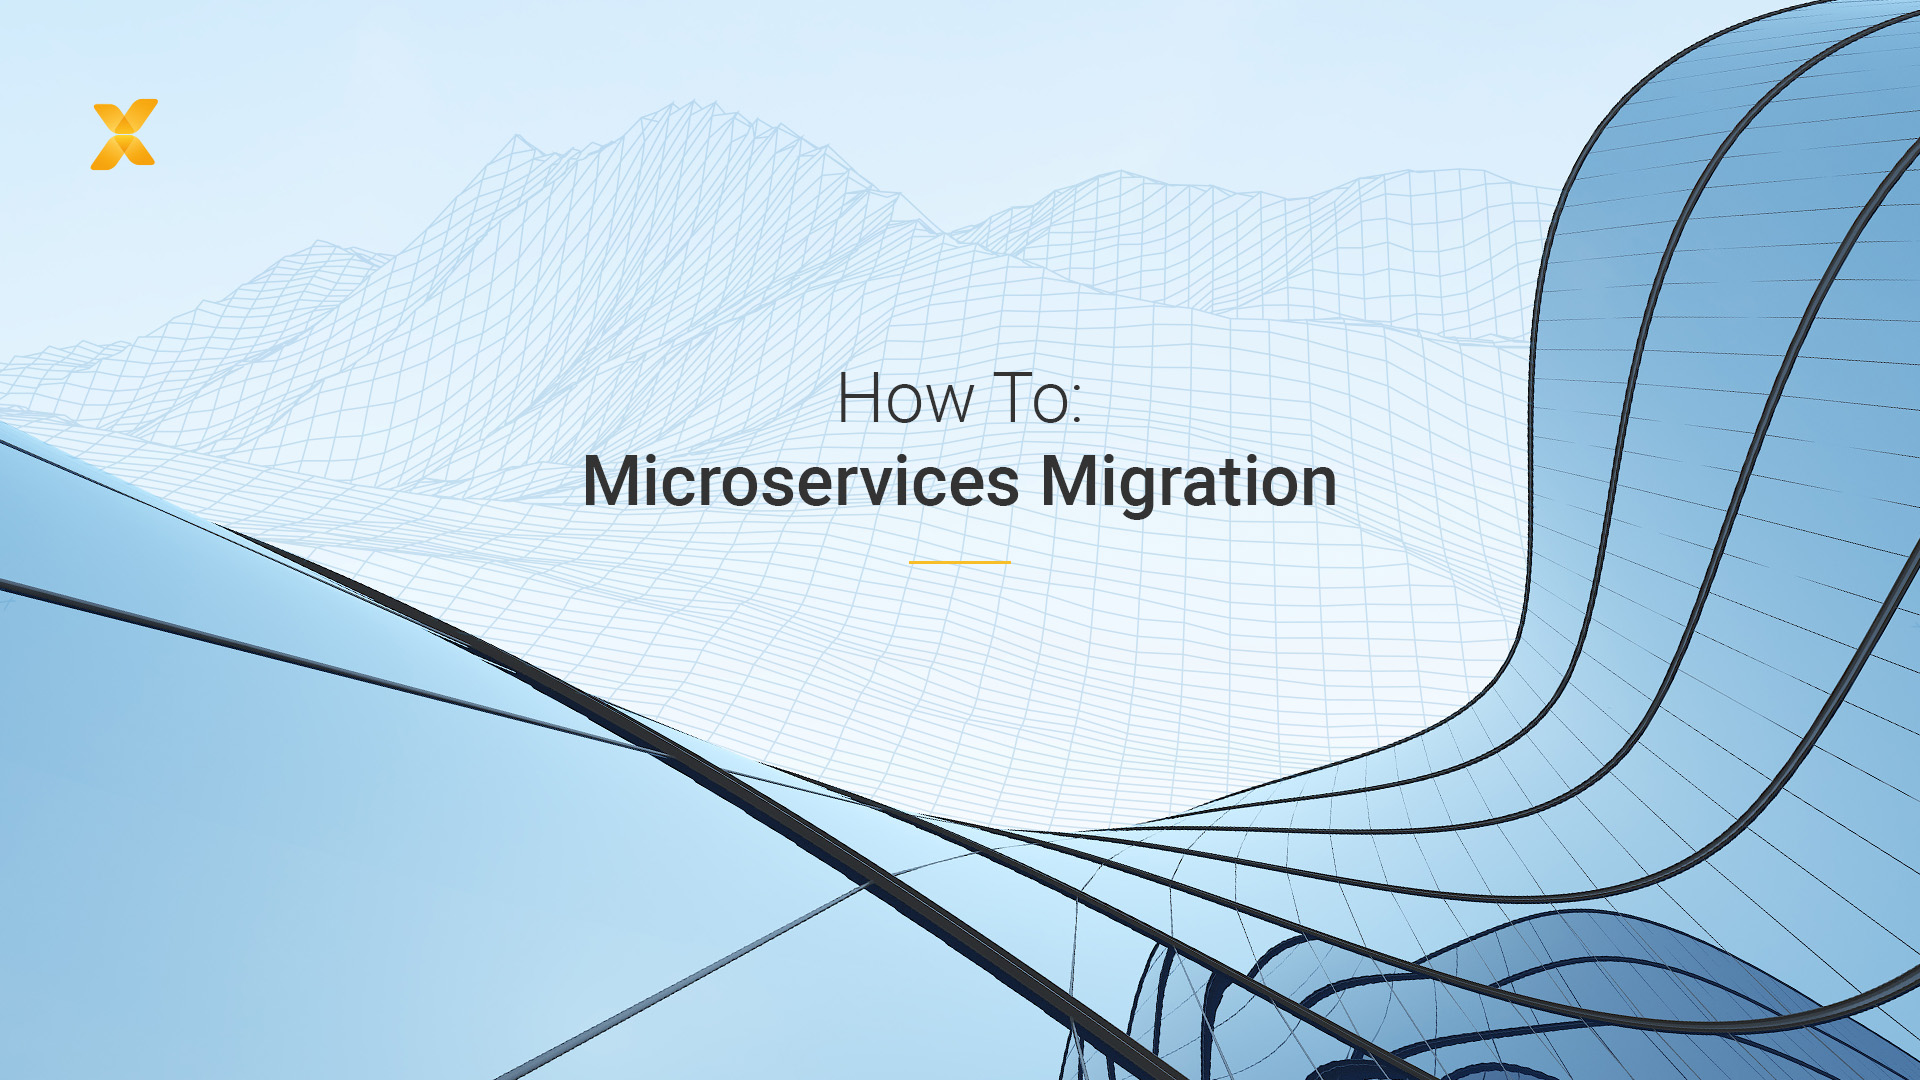 Microservices Migration